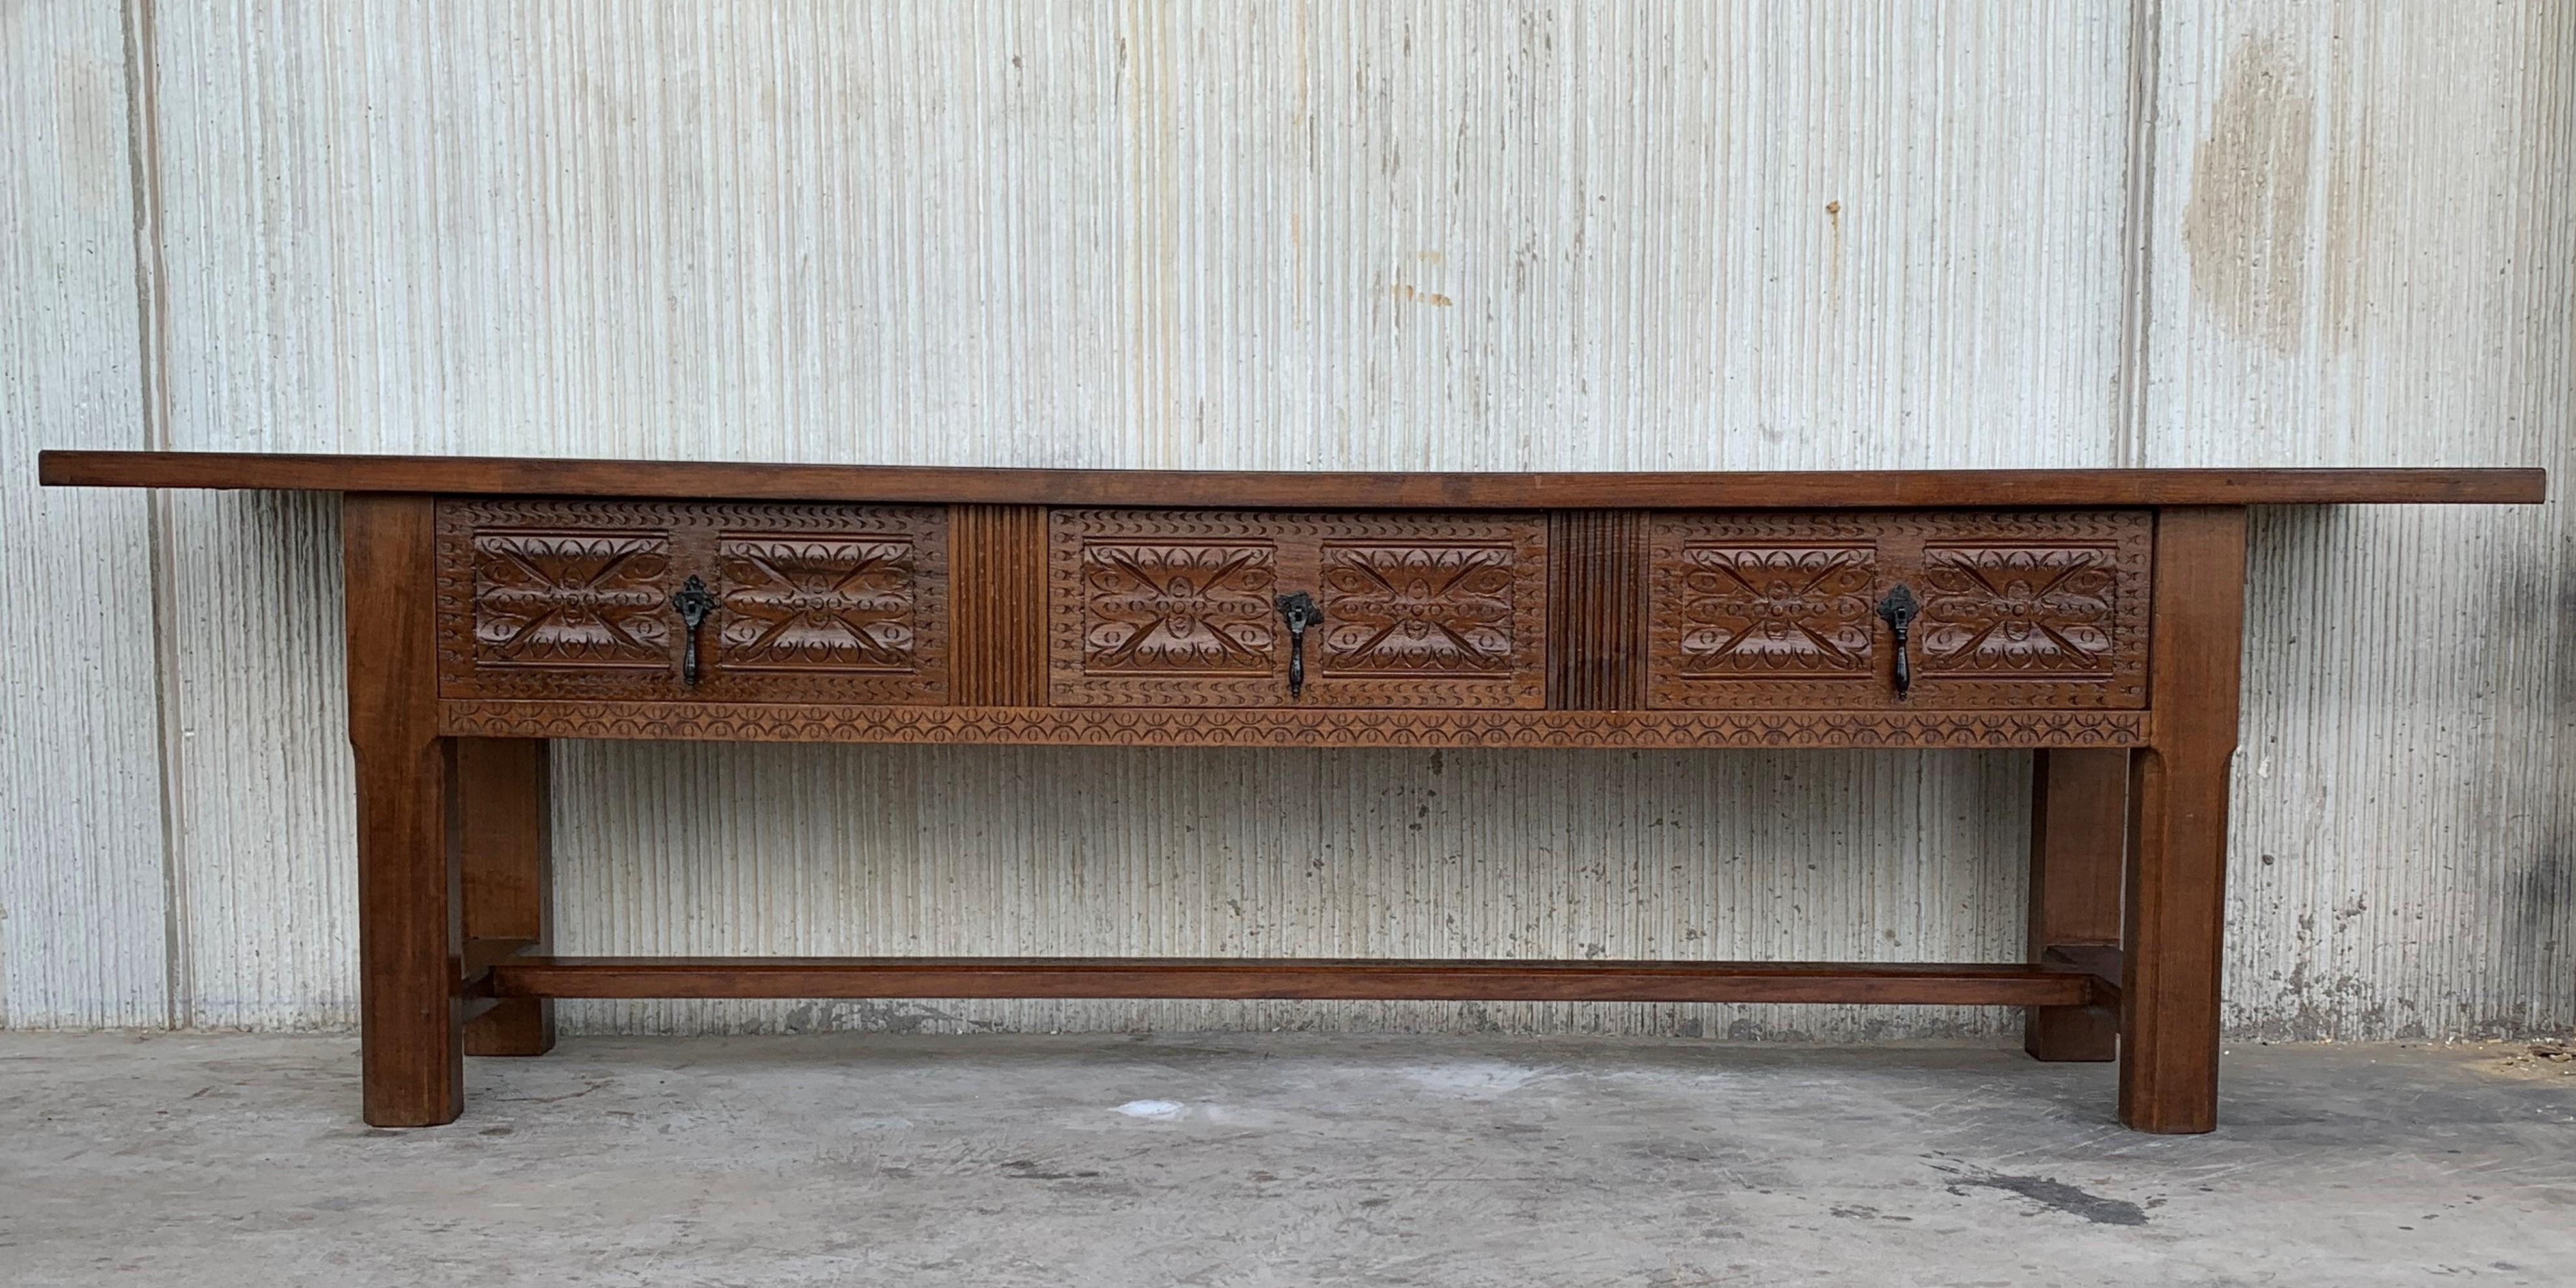 20th century Spanish Baroque carved walnut refectory table with three carved drawers.
Solid wood and beautiful legs.
One piece top.
Original iron hardware.
We adcquired this items in Segovia, Spain

Completely restored.